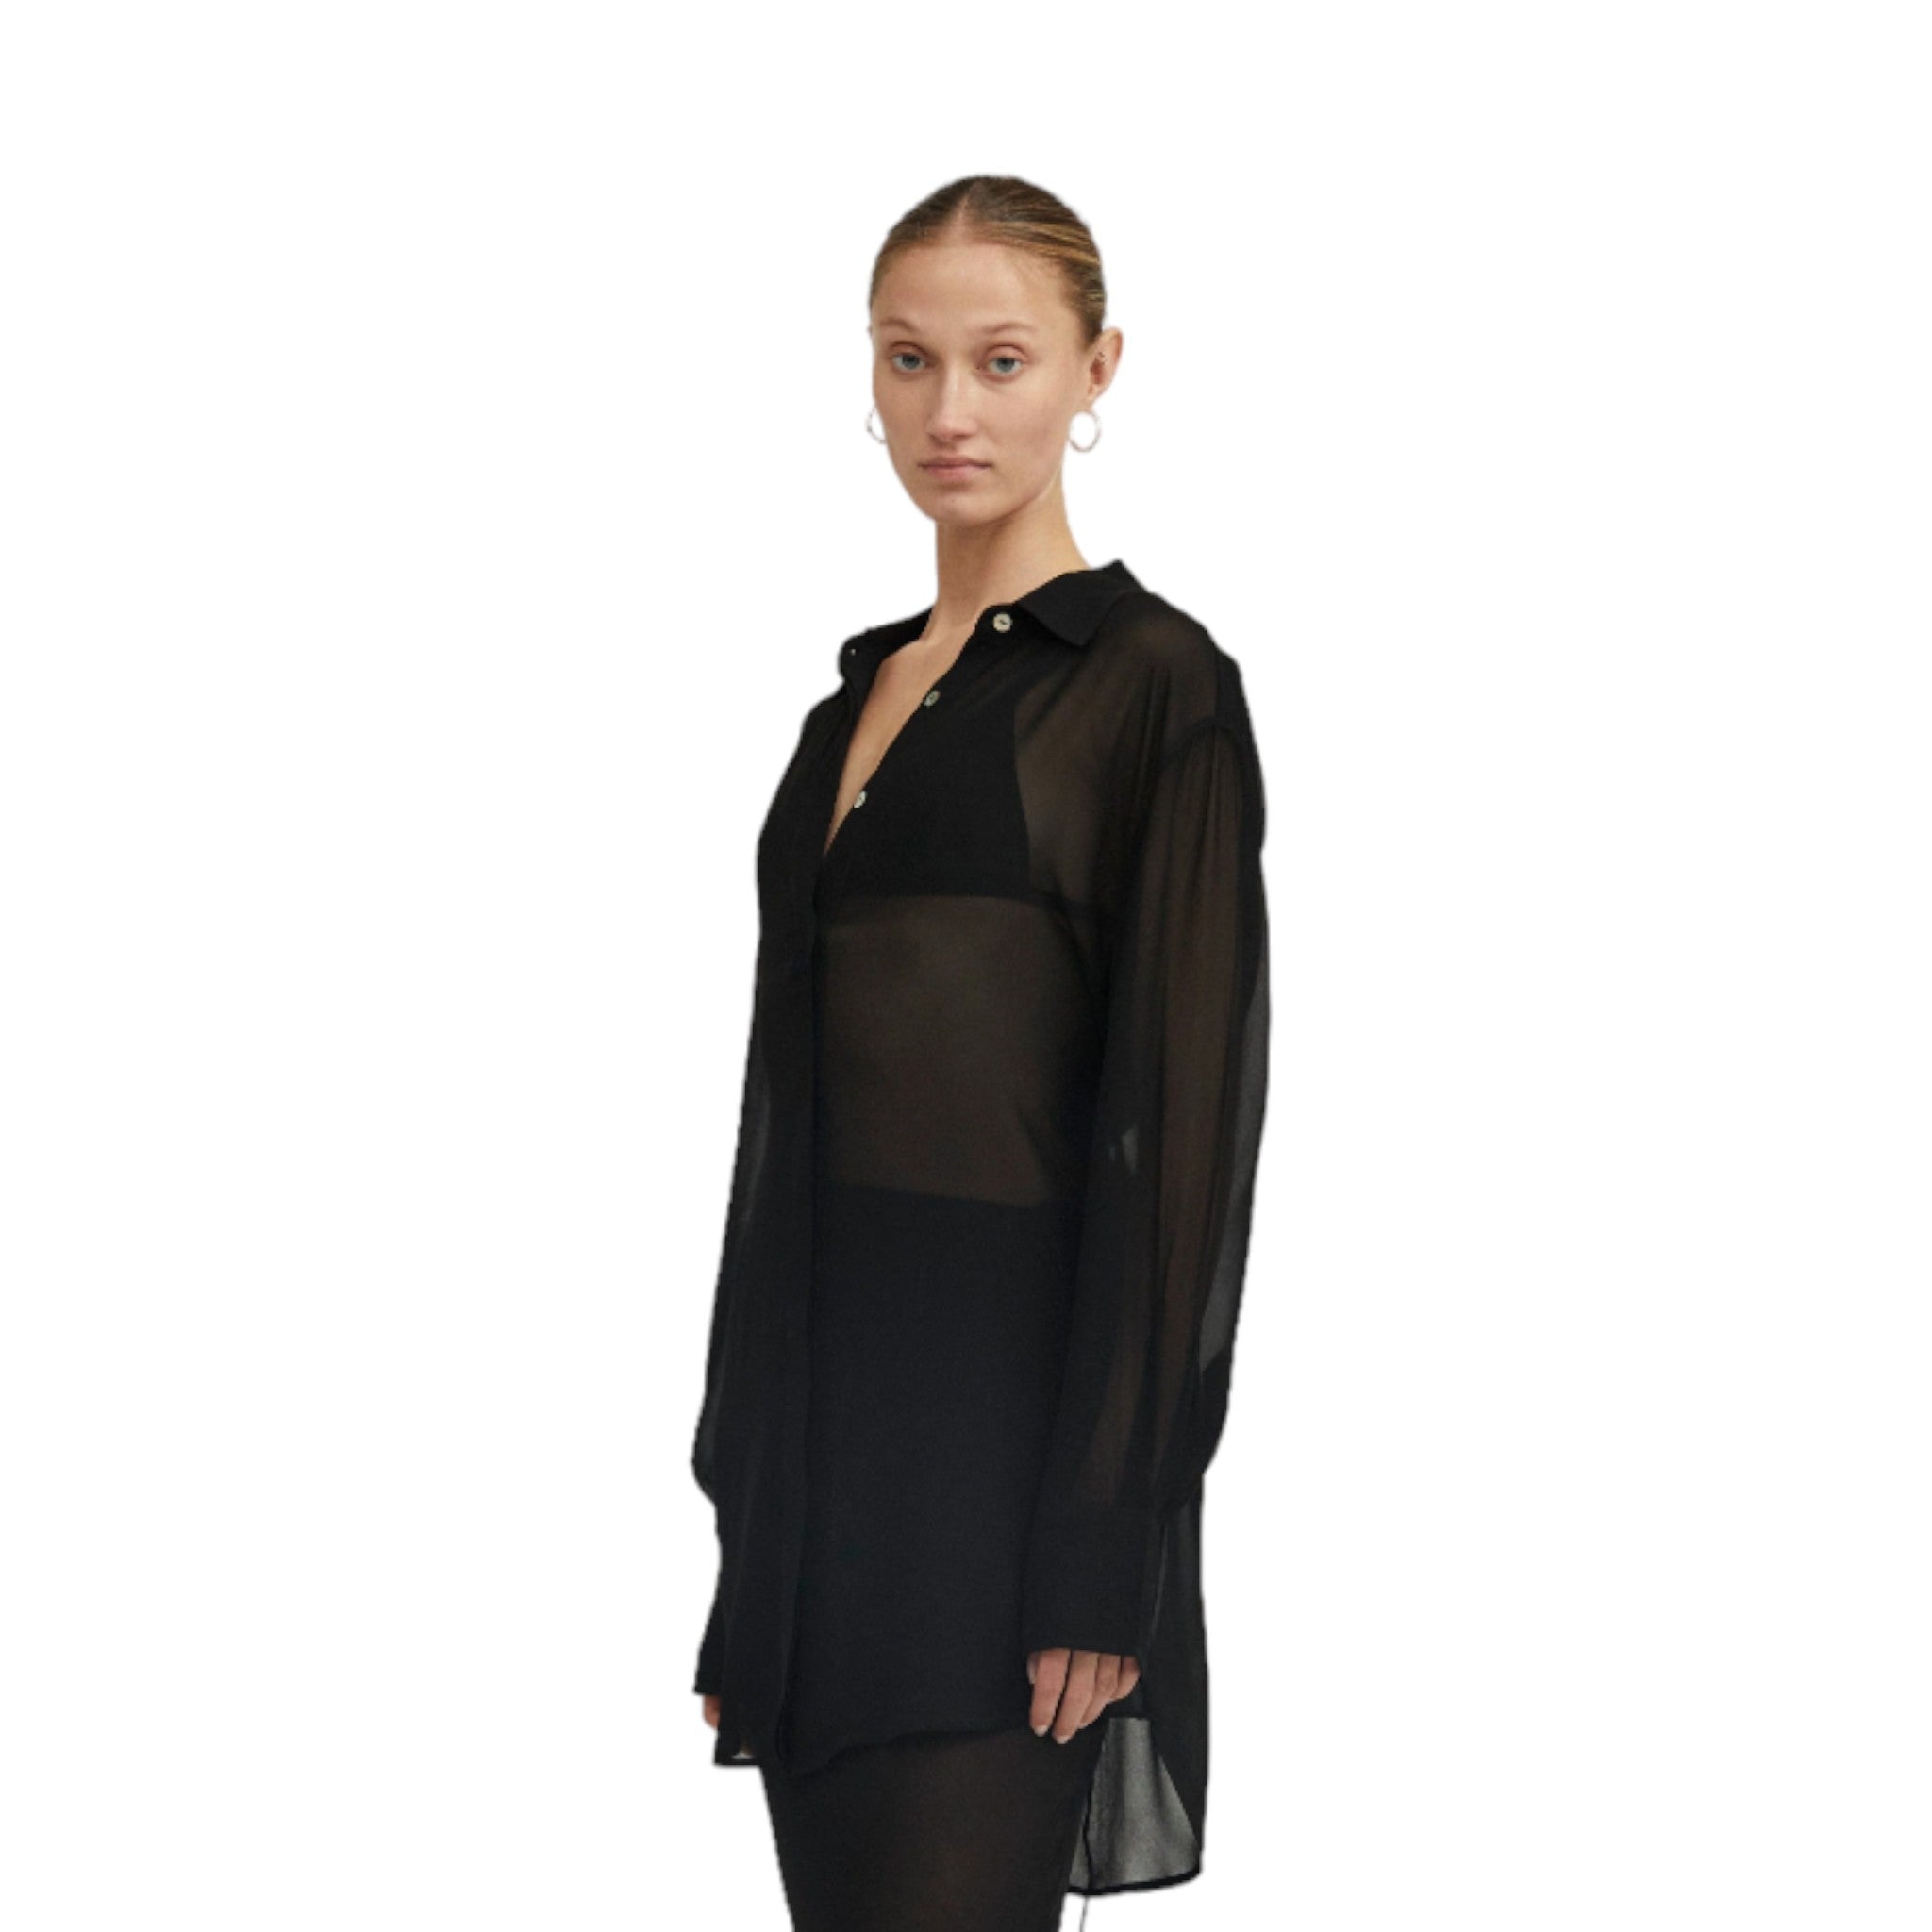 above the knee sheer black button up shirt dress with waist tie and curved hem